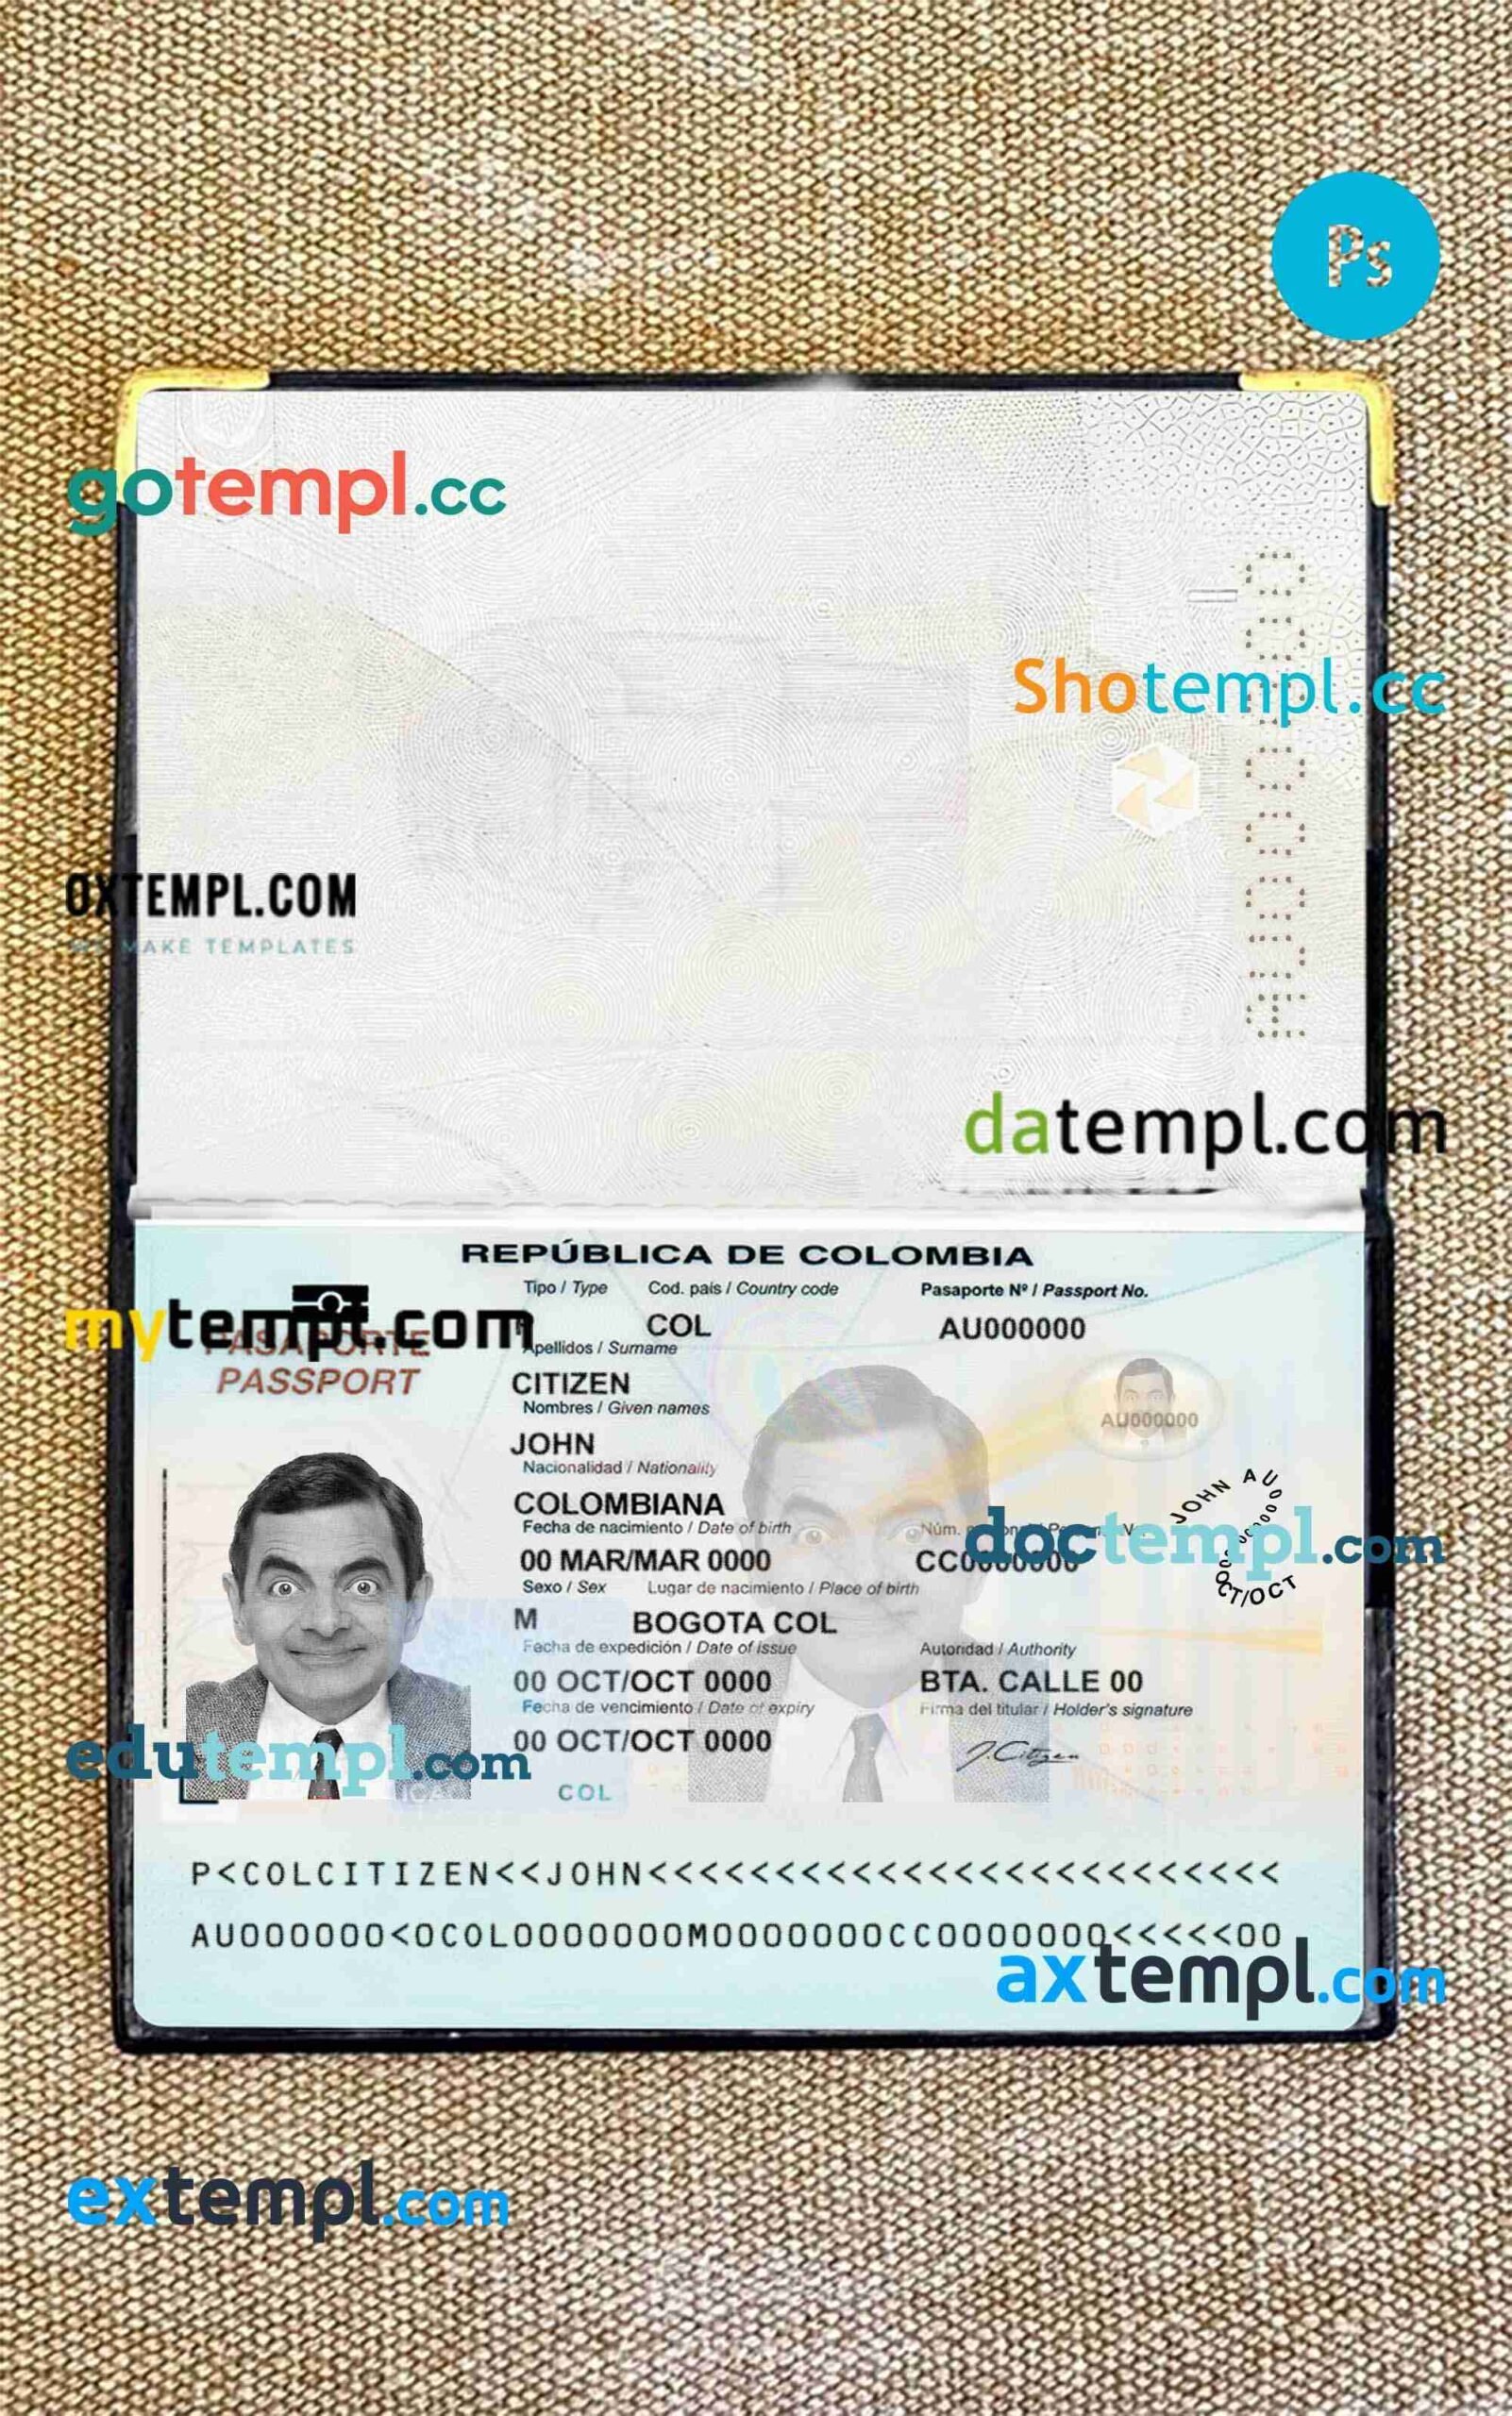 Canada Permanent resident card template in PSD format, fully editable (+editable PSD photo look)